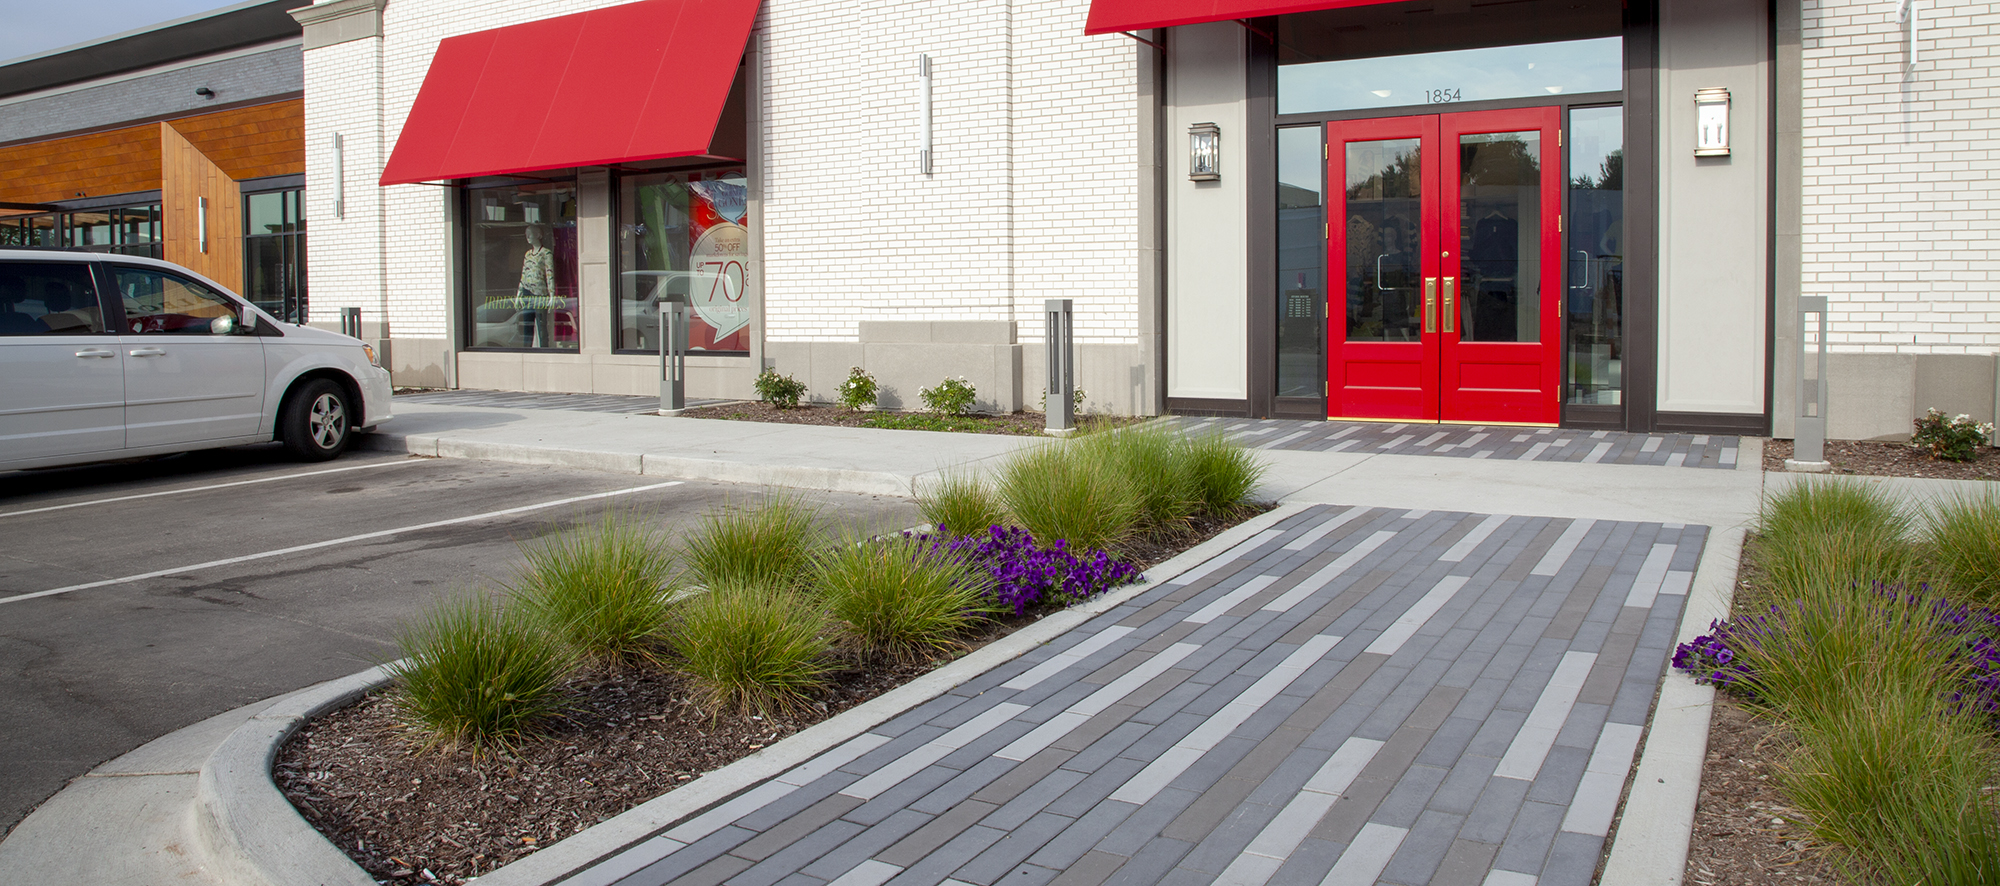 Beside a parking lot a path paved with tri-color Promenade Plank Pavers, bordered by gardens, leads to the red doors of a shopping center.